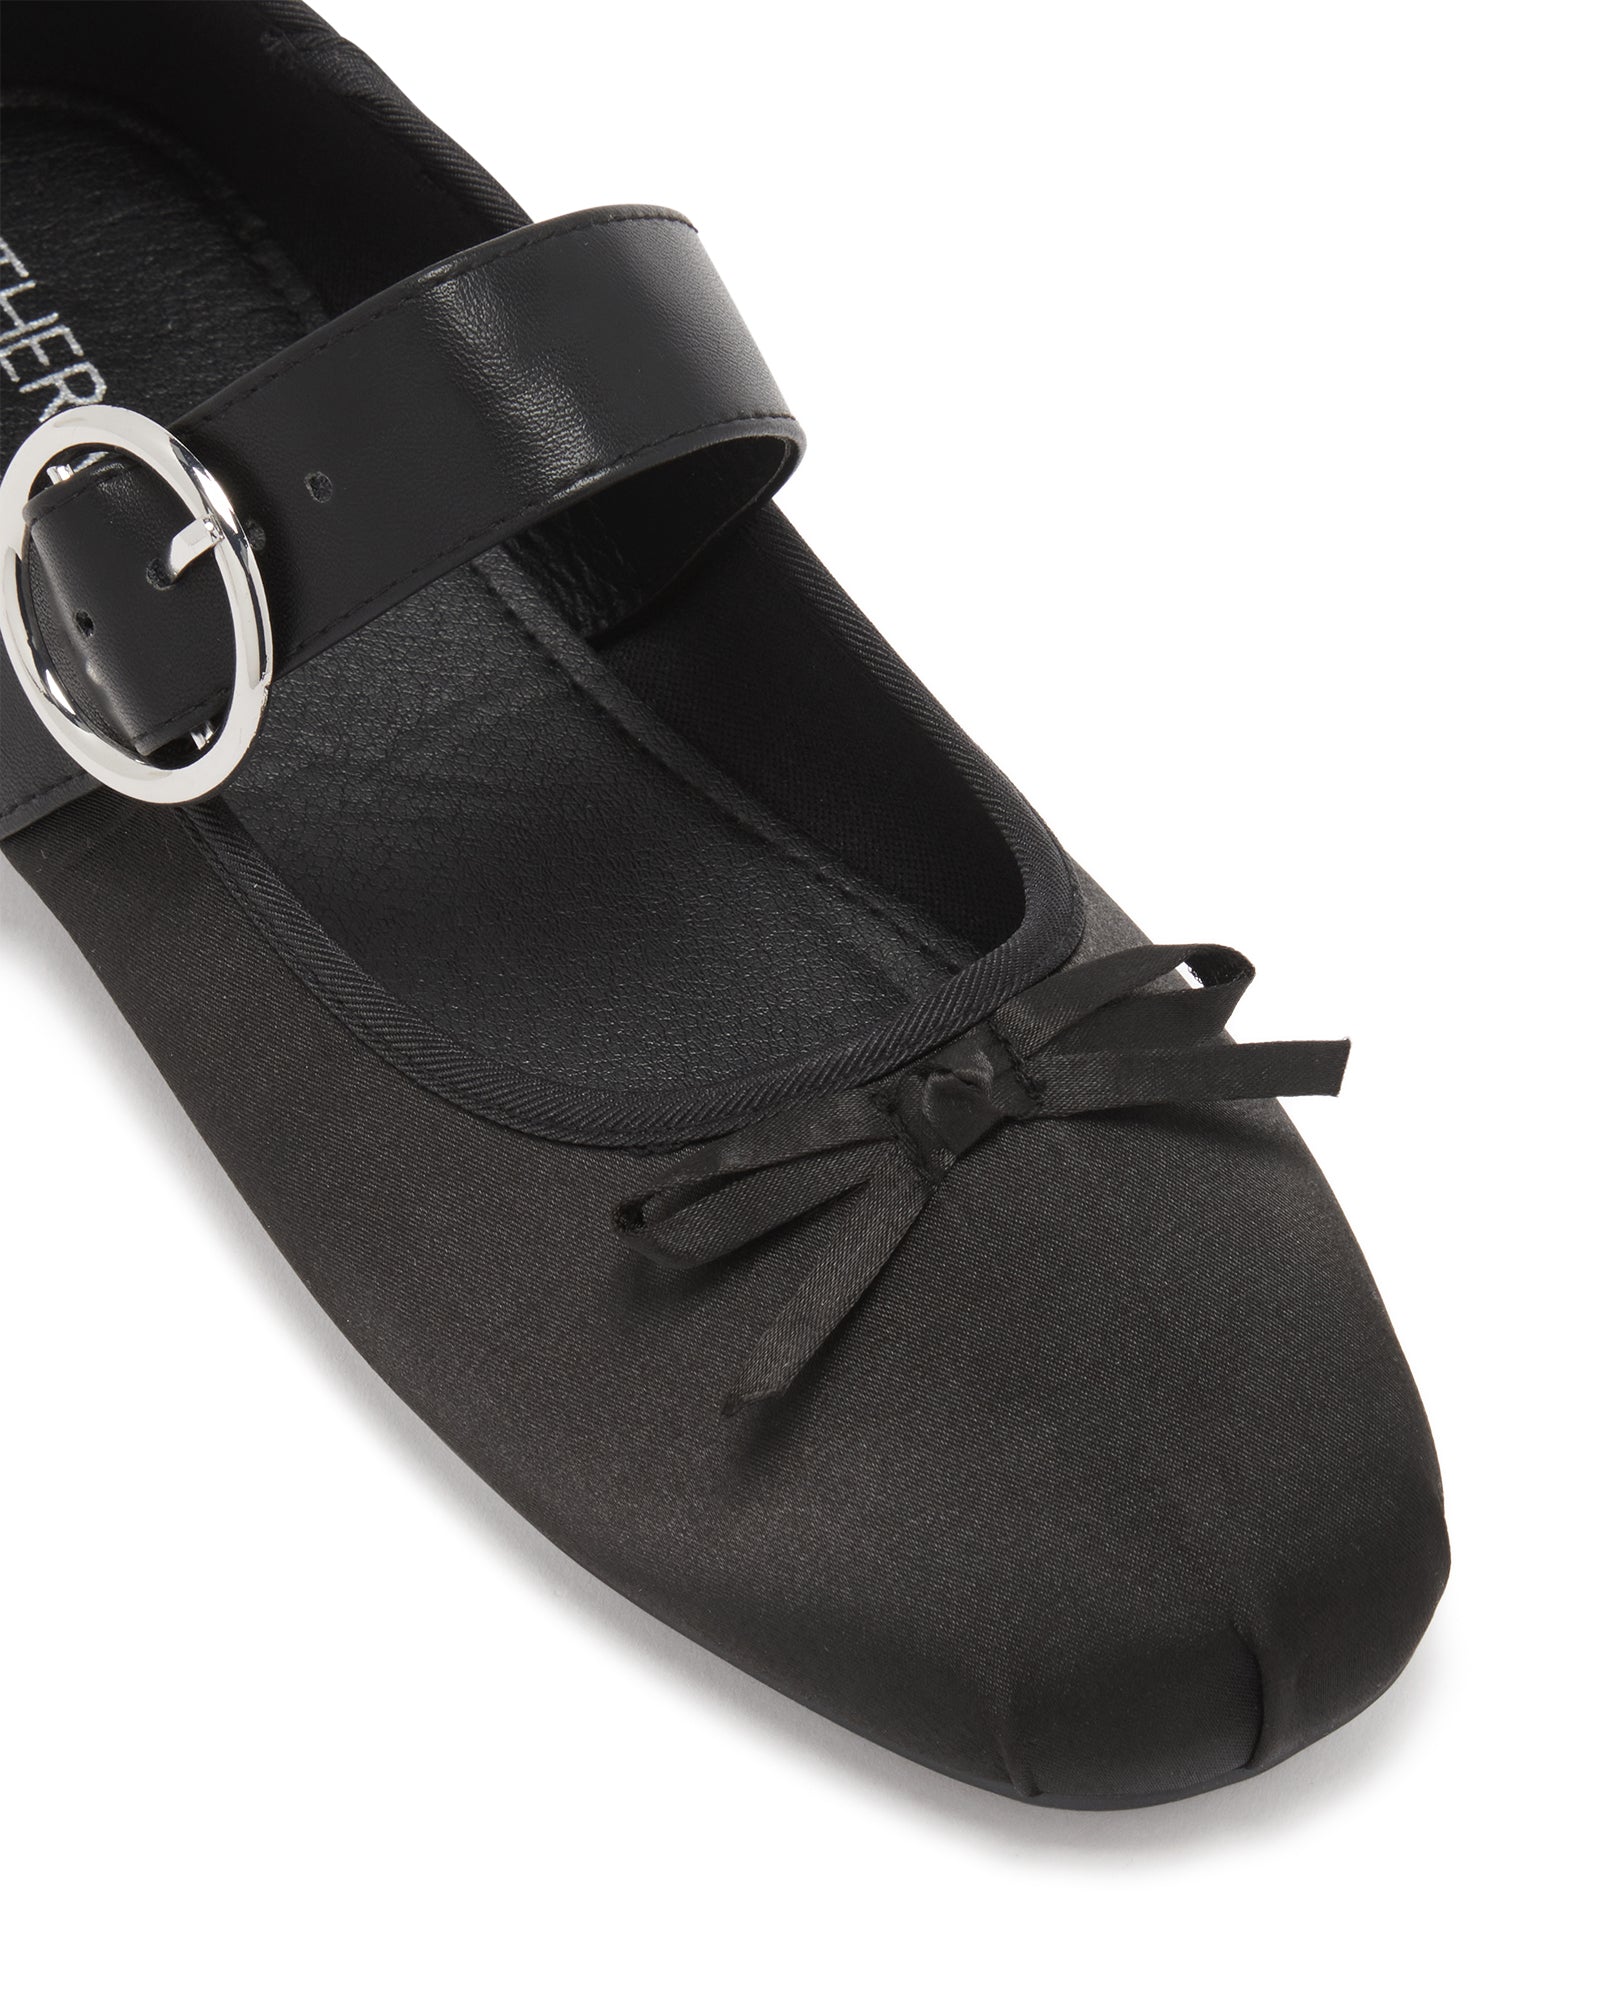 Therapy Shoes Mesmerize Black Satin | Women's Flats | Ballet | Mary Jane